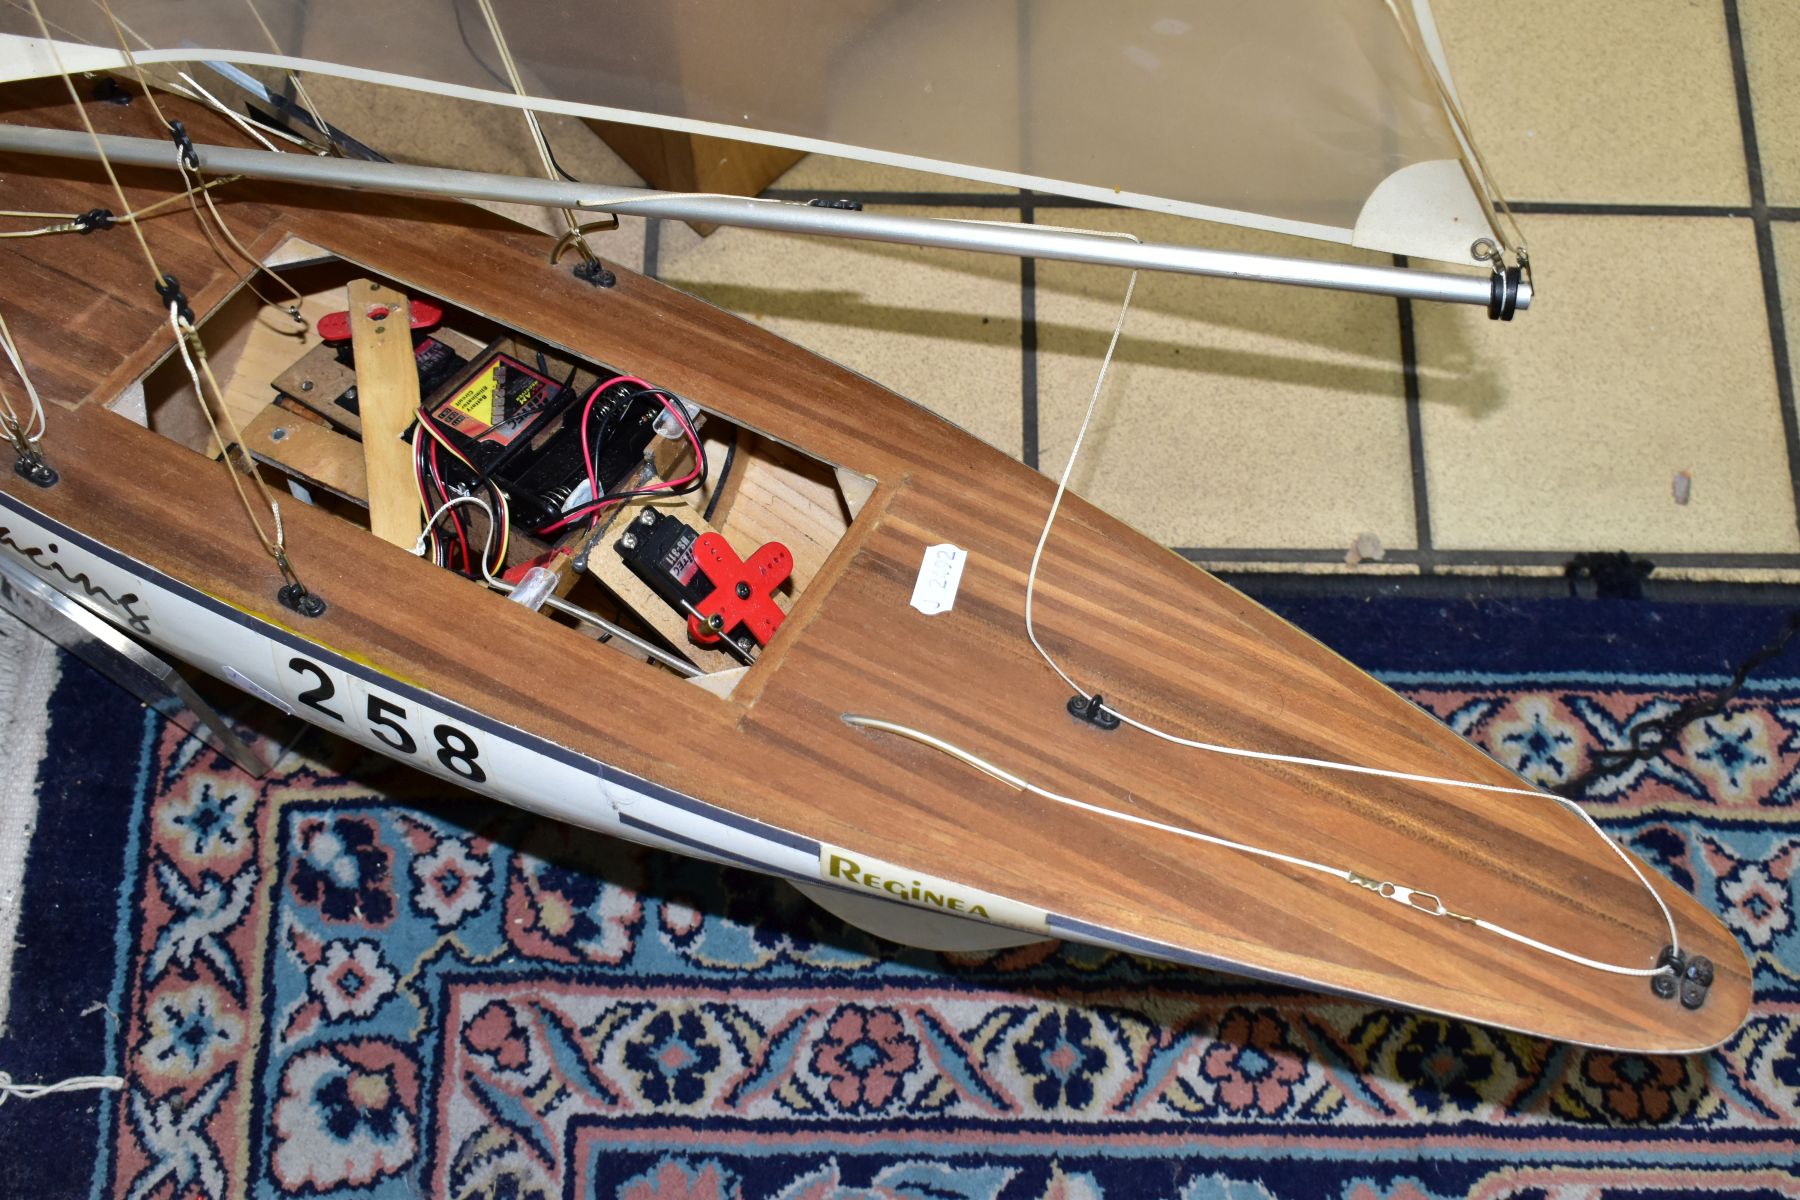 A SCRATCH BUILT MODEL YACHT, at full sail, the deck with rigging and clear sails, motor in hull, - Image 4 of 8